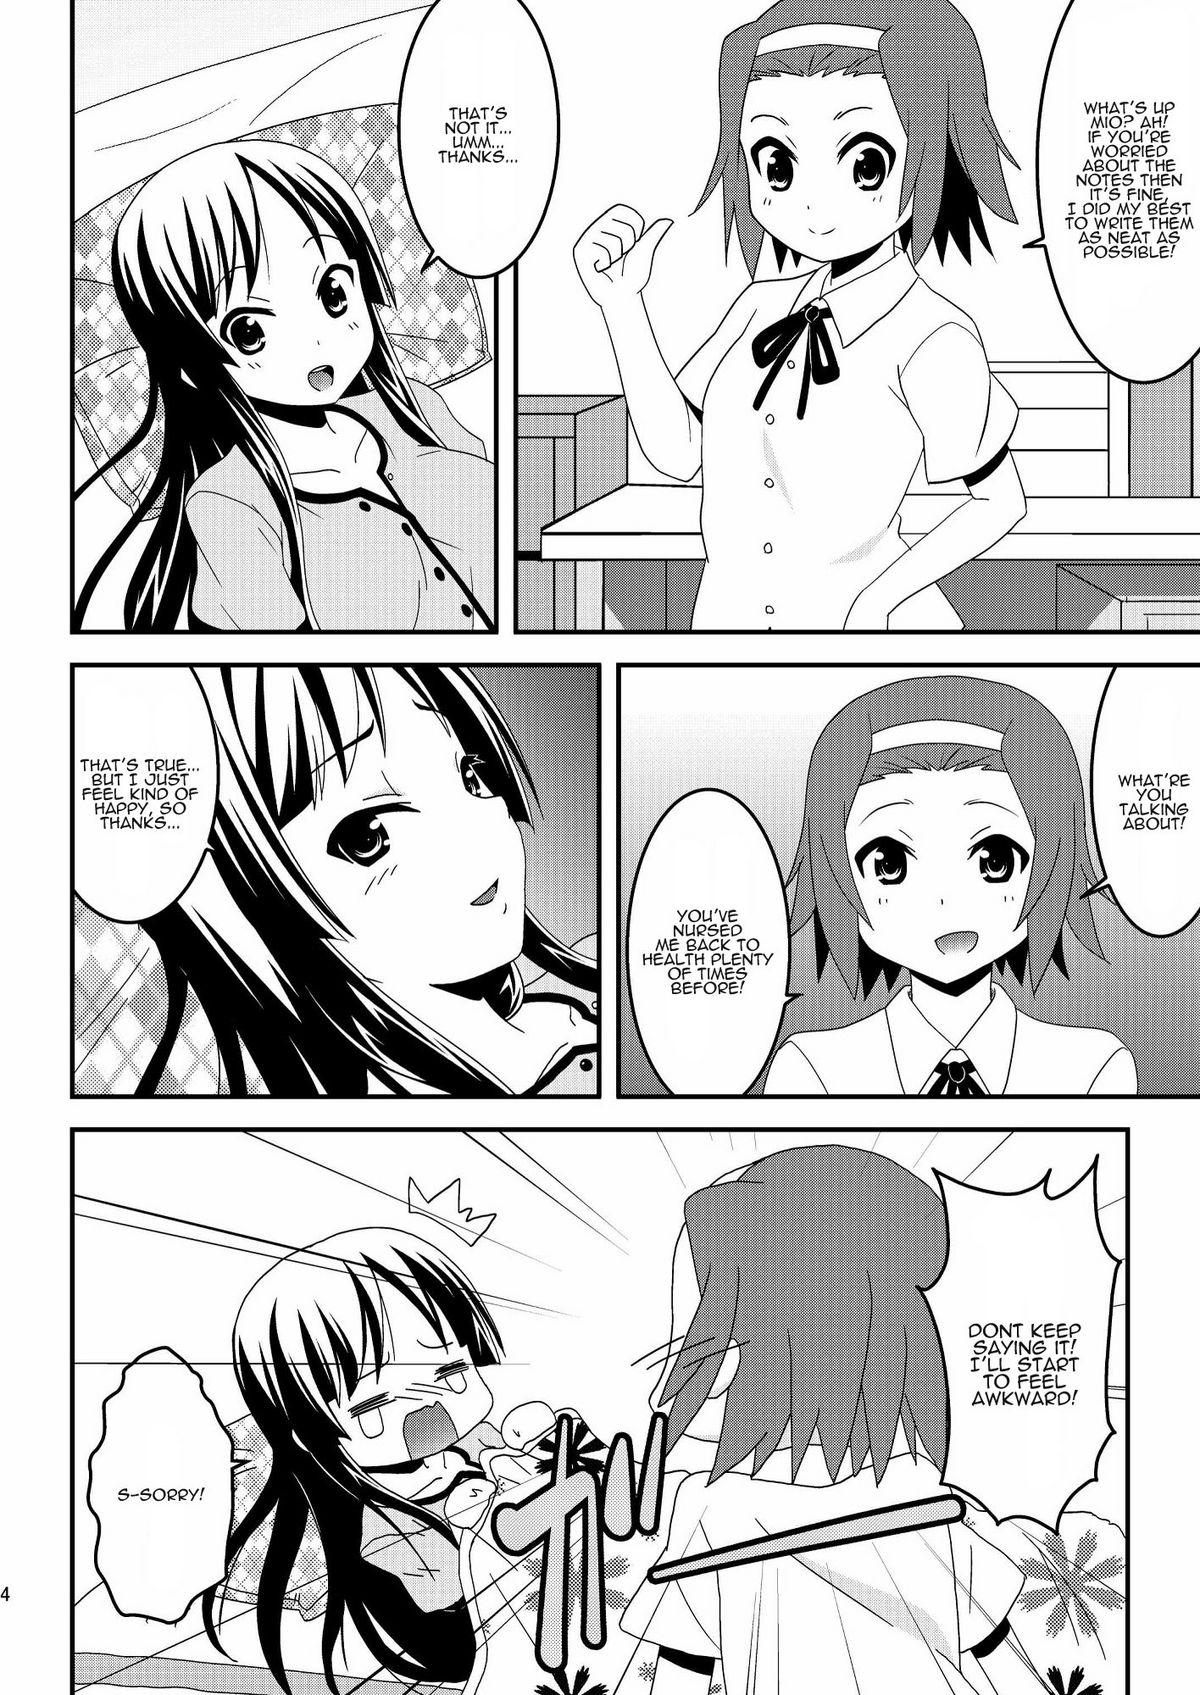 Publico Sweet Sweet - K-on Sharing - Page 4